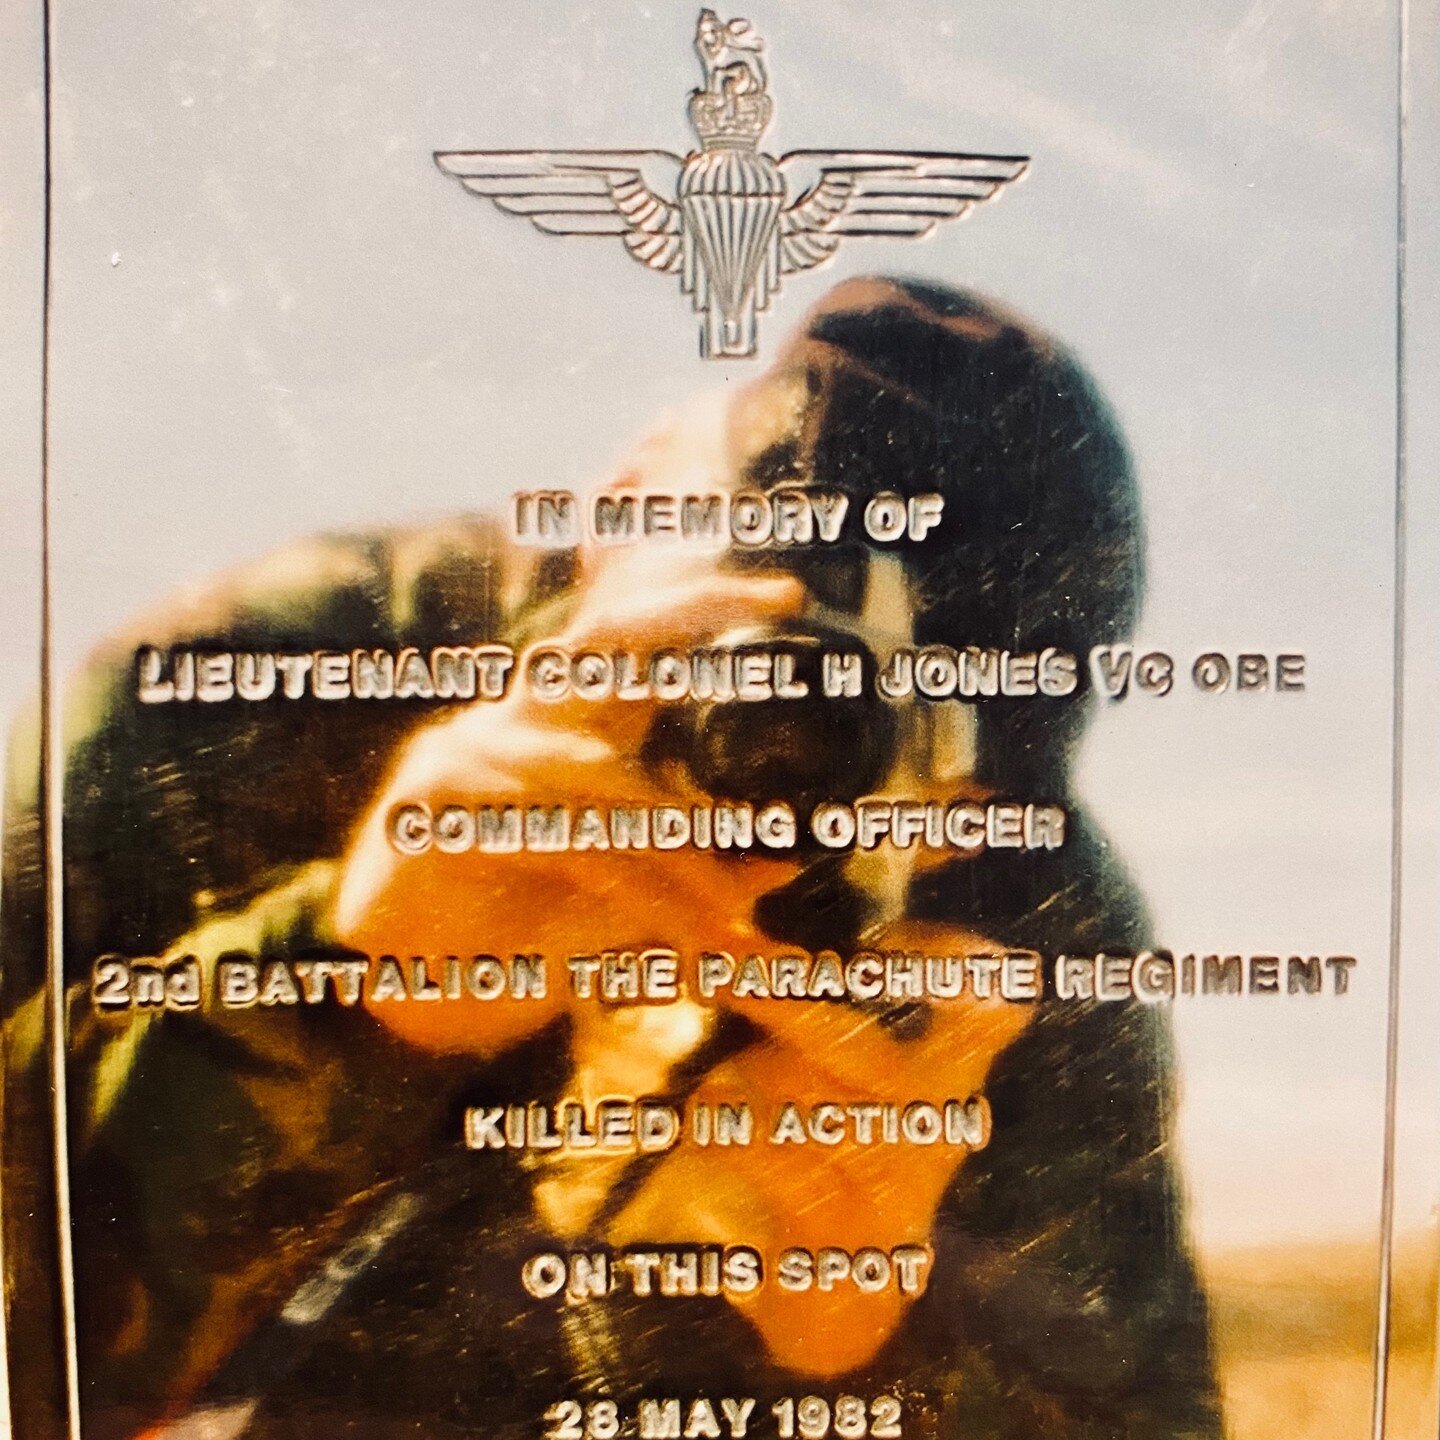 The memorial to Lieutenant Colonel Herbert Jones, VC, OBE, known as H. Jones, a British Army officer and posthumous recipient of the Victoria Cross. 

This memorial is located at Darwin (Goose Green), Falkland Islands, South Atlantic.

Photo taken by